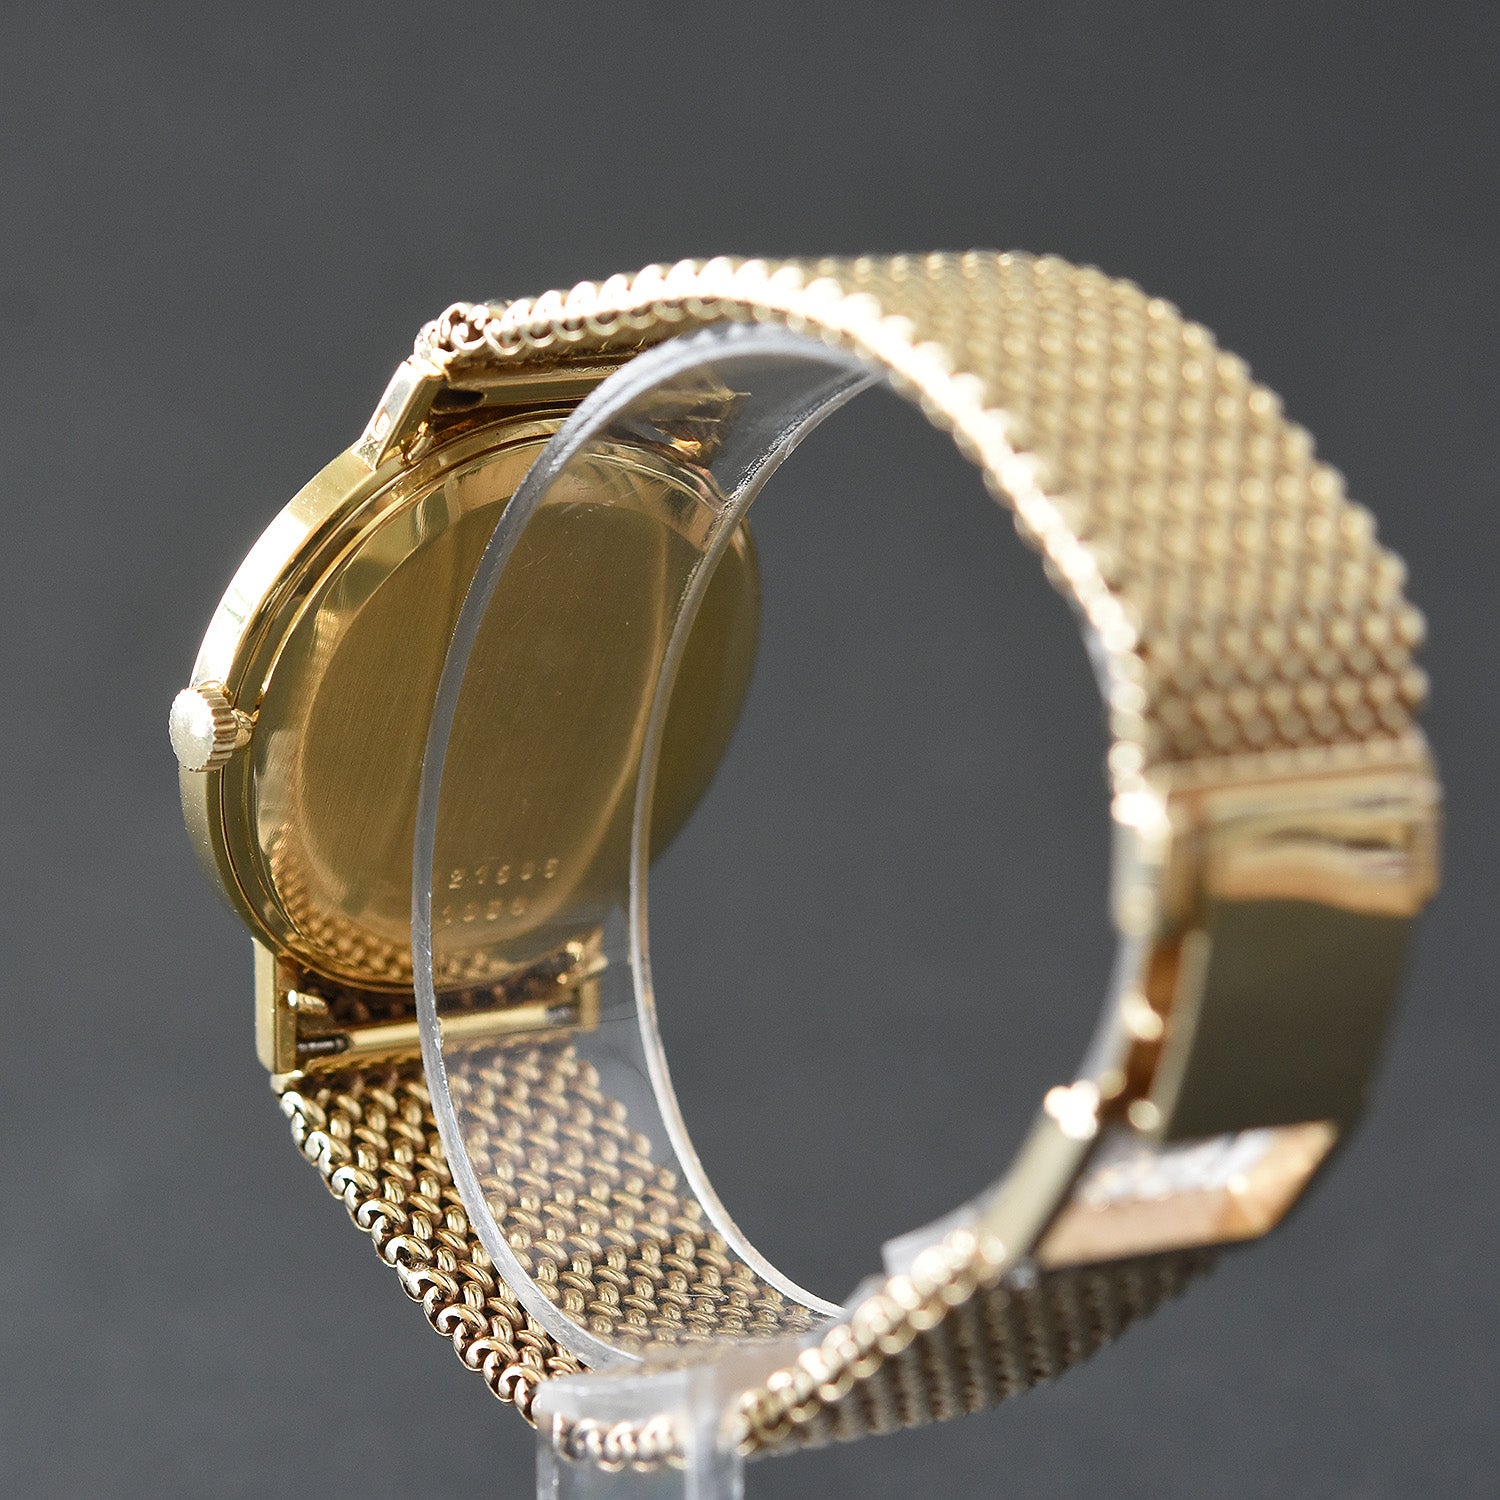 uberjewels Gold Plated Watch bracelet, lug size 18, Metal band clasp 18 mm  Stainless Steel Watch Strap Price in India - Buy uberjewels Gold Plated Watch  bracelet, lug size 18, Metal band